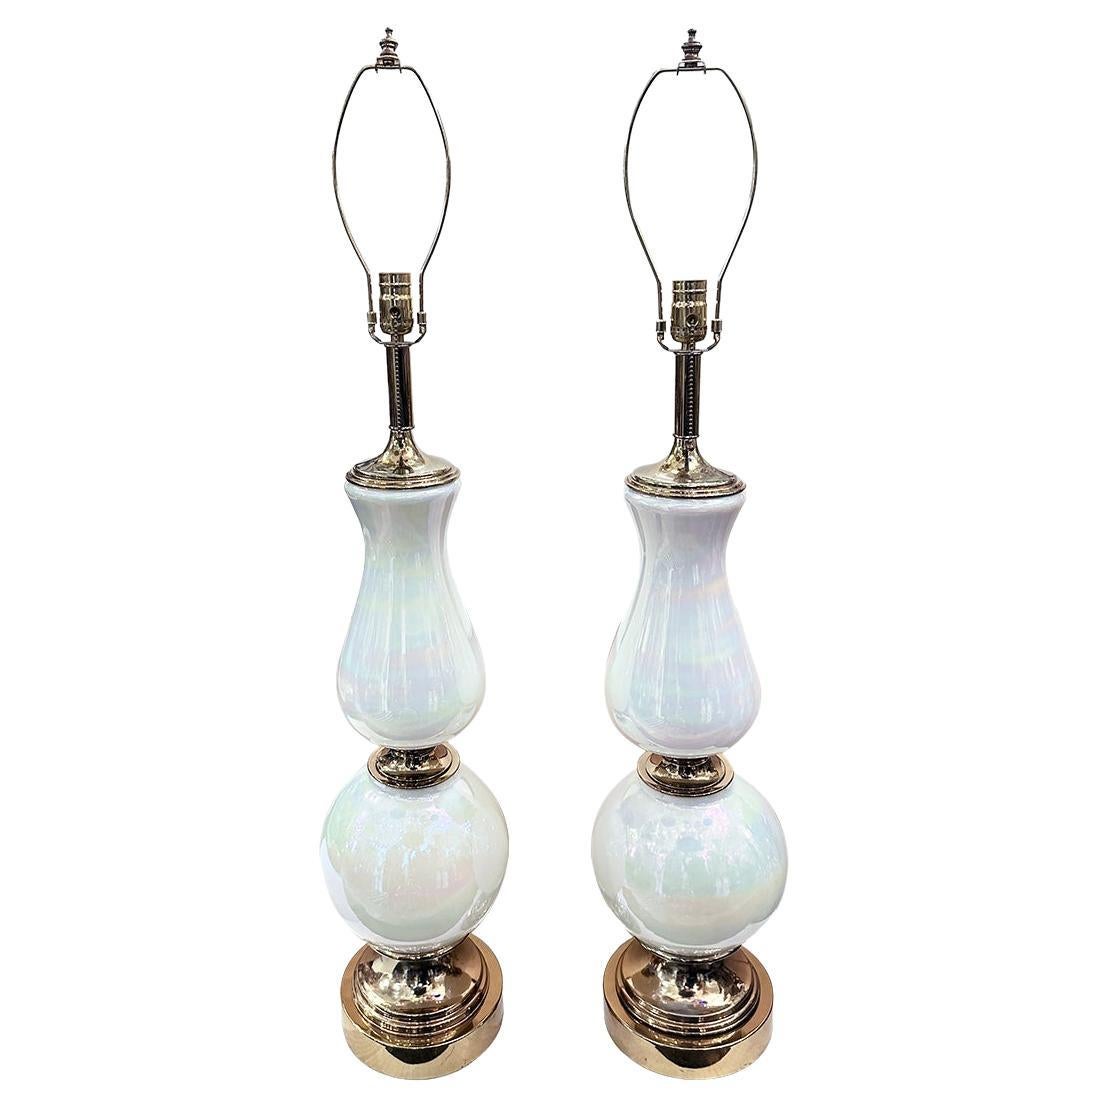 Pair of Large White Glass Lamps